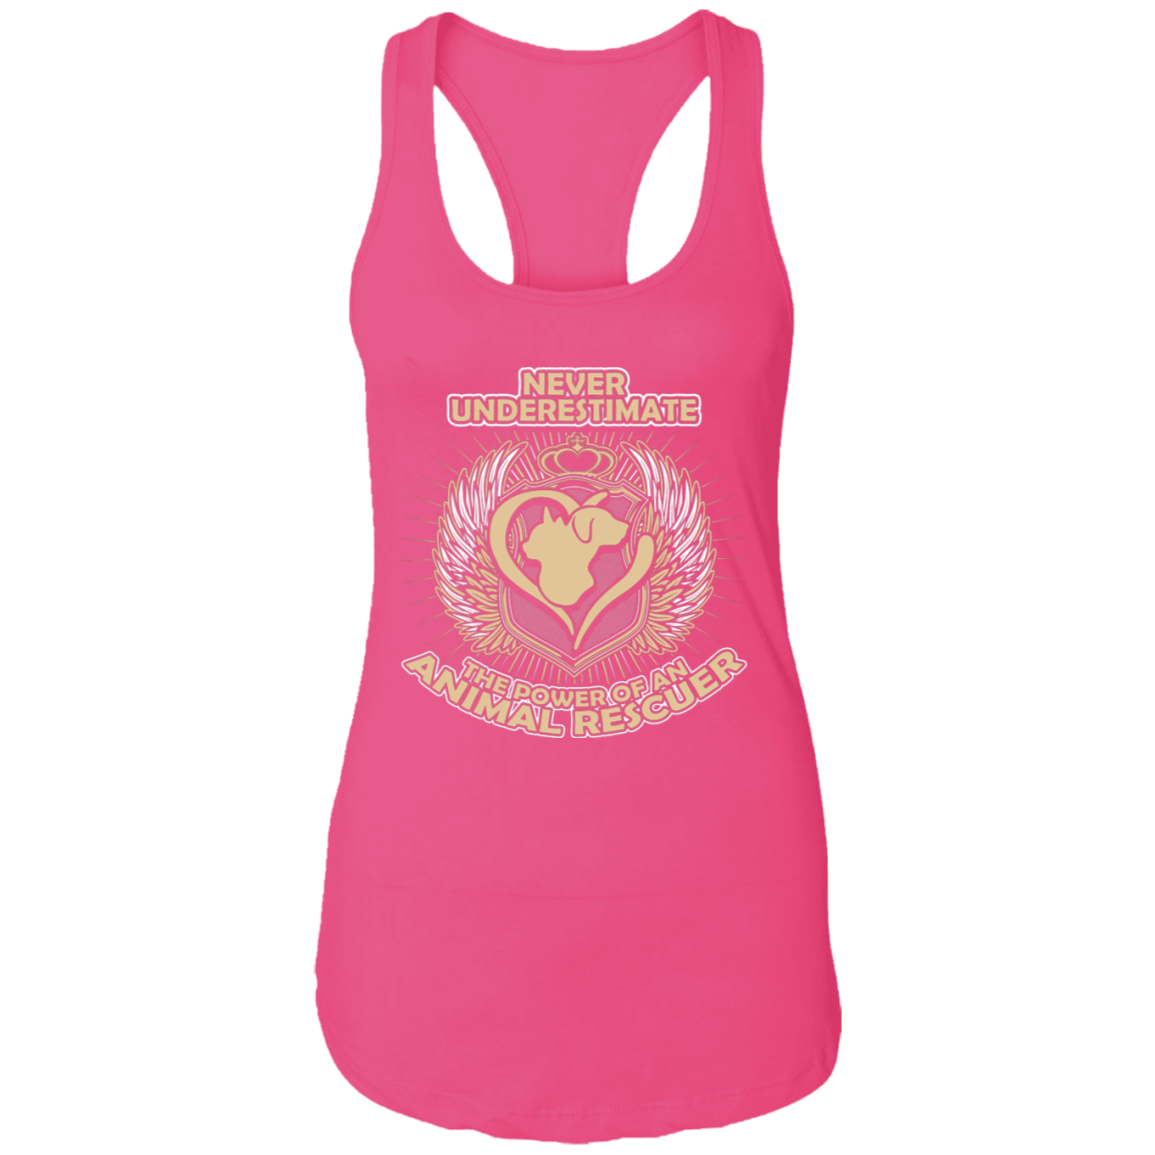 Power Of An Animal Rescuer - Ladies Racer Back Tank.